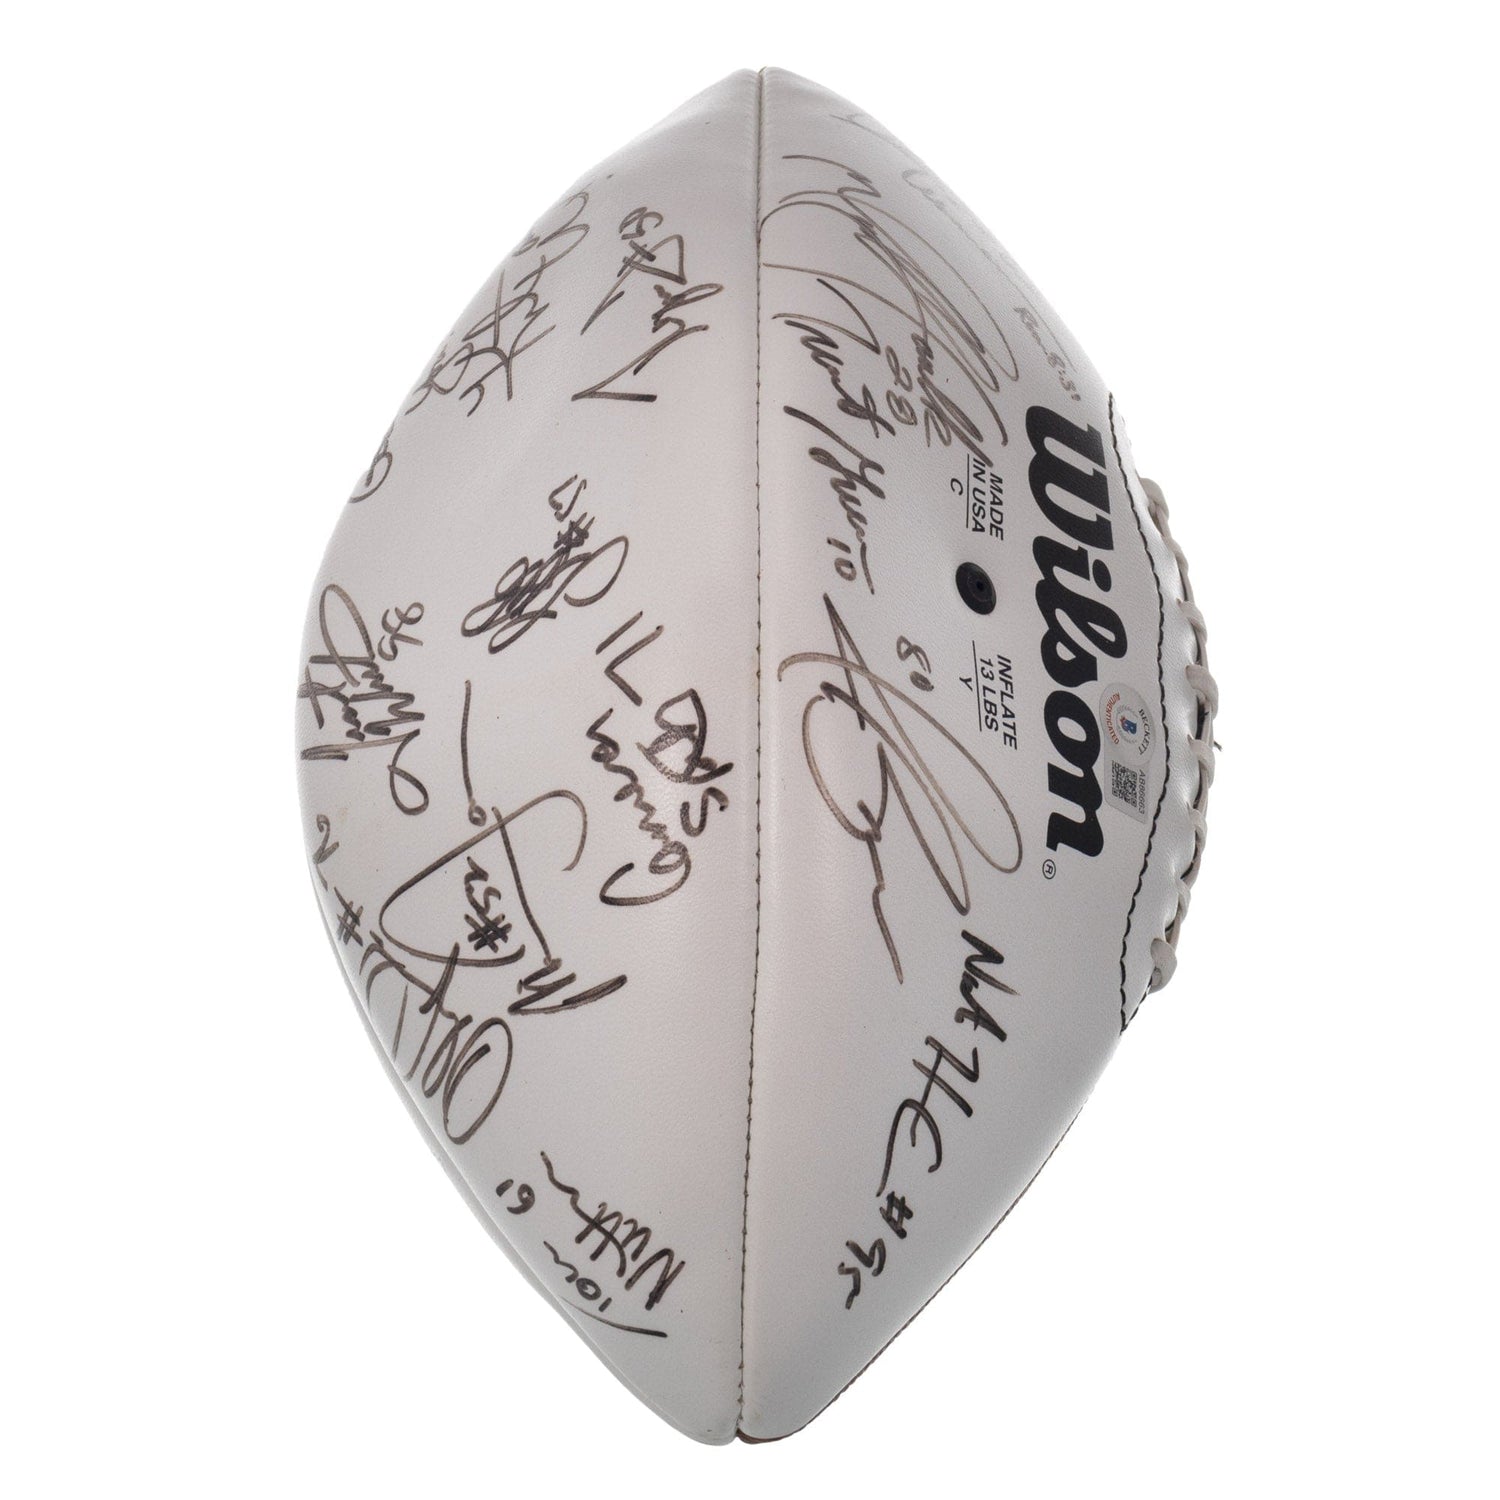 2001 St. Louis Rams Super Bowl Team Signed Football Tall